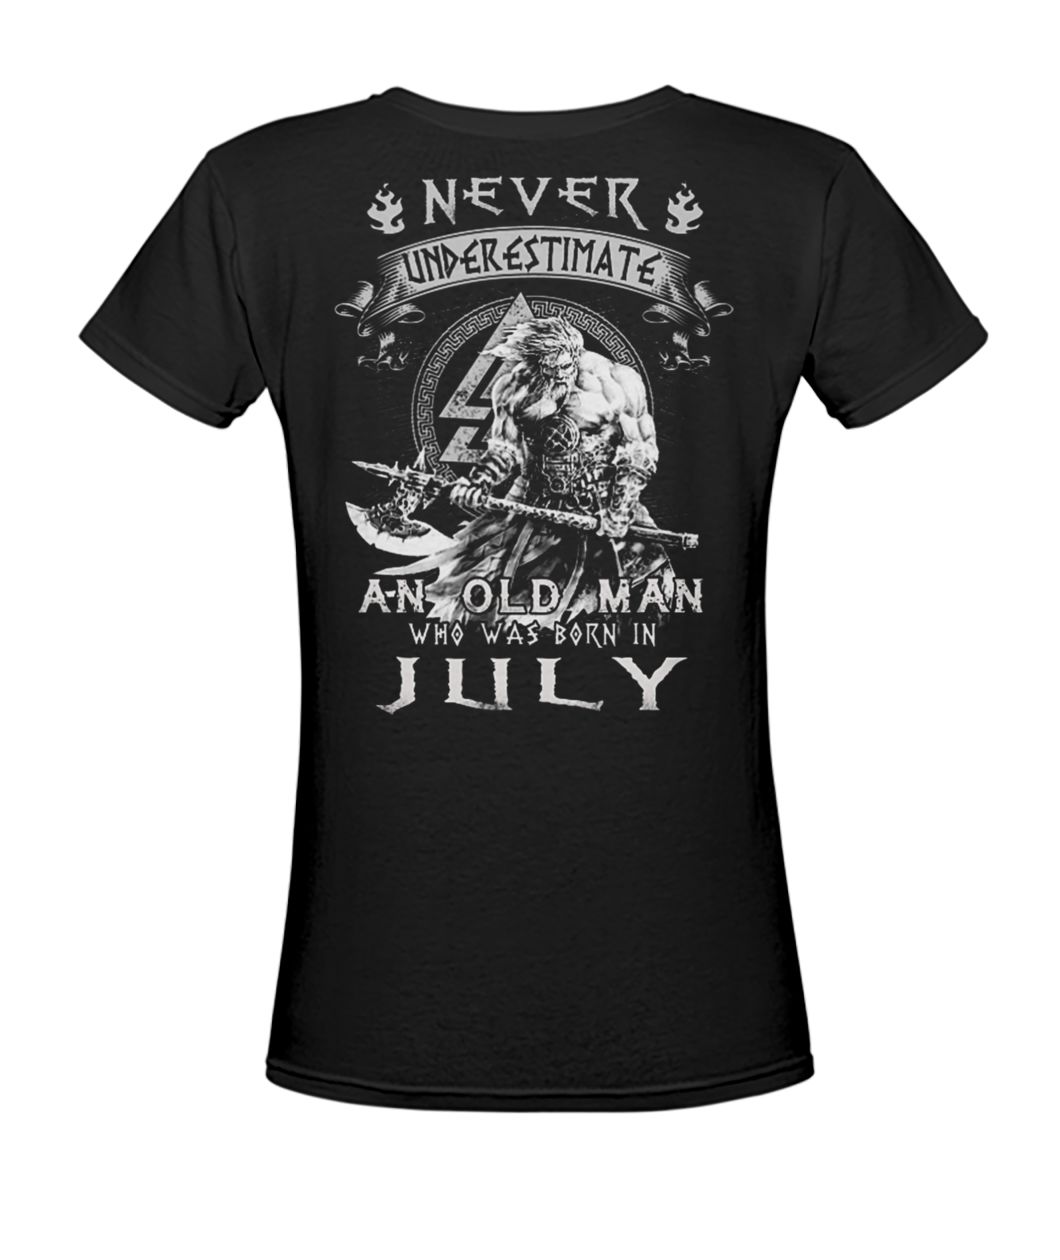 Never underestimate an old man who was born in july women's v-neck